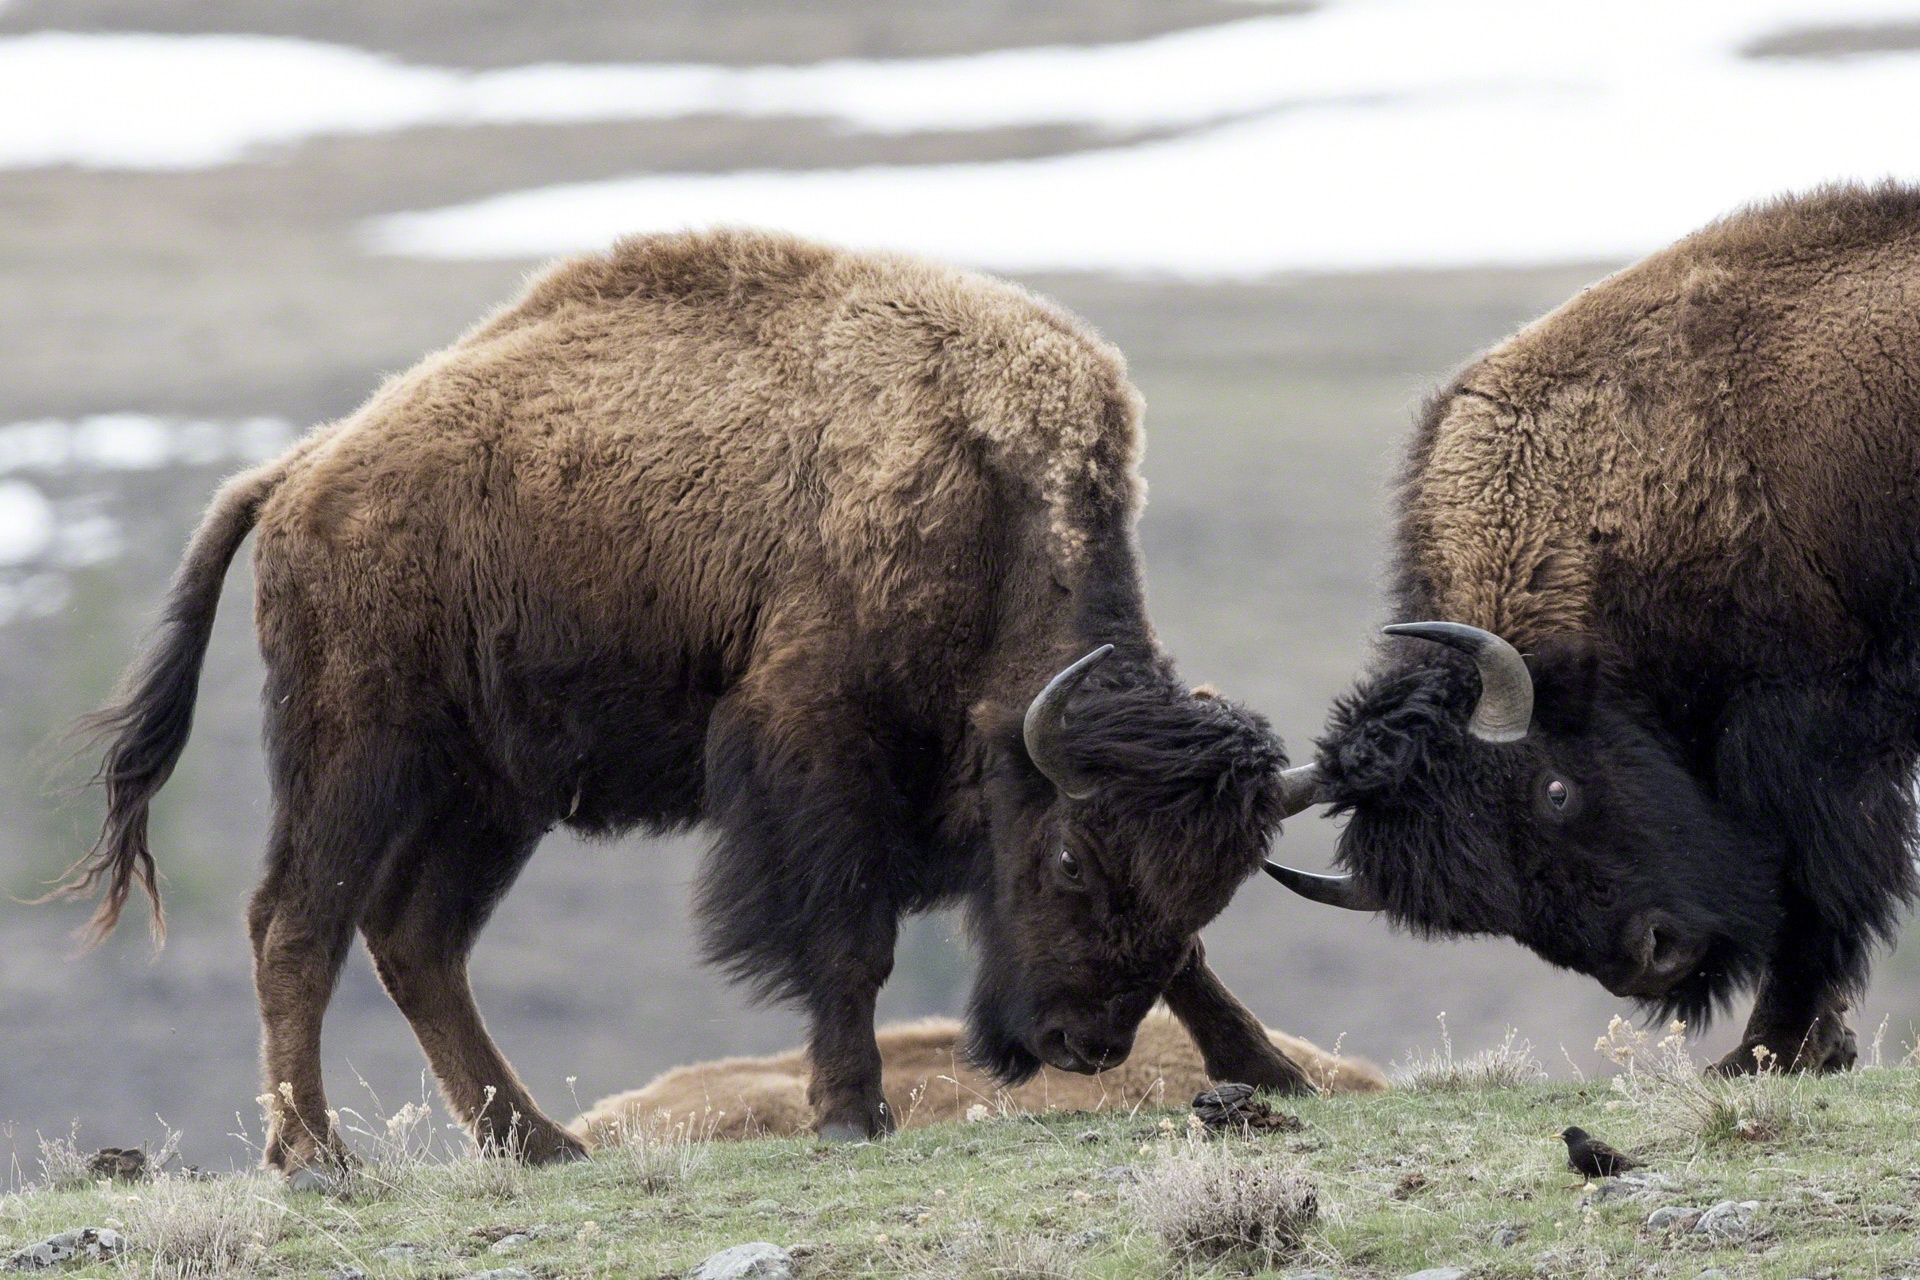 Download wallpaper nature, fight, Buffalo, section animals in resolution 19...